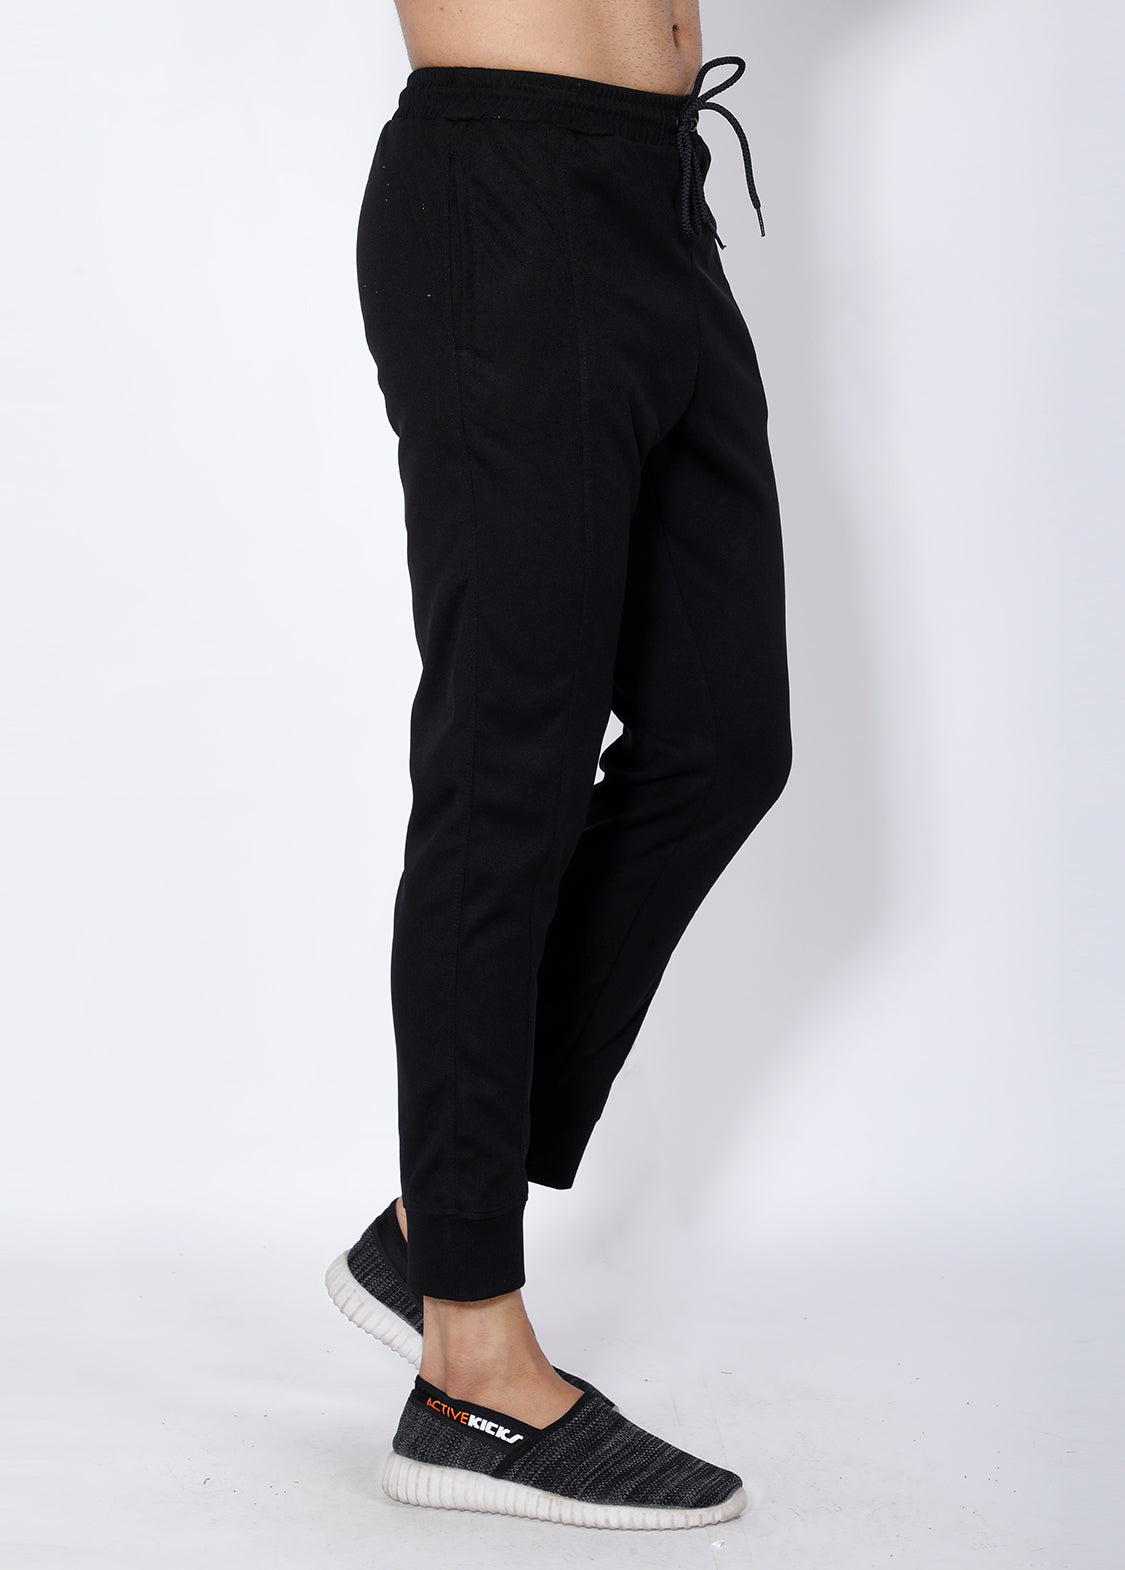 DOLCE & GABBANA Slim-fit cashmere-blend track pants | THE OUTNET